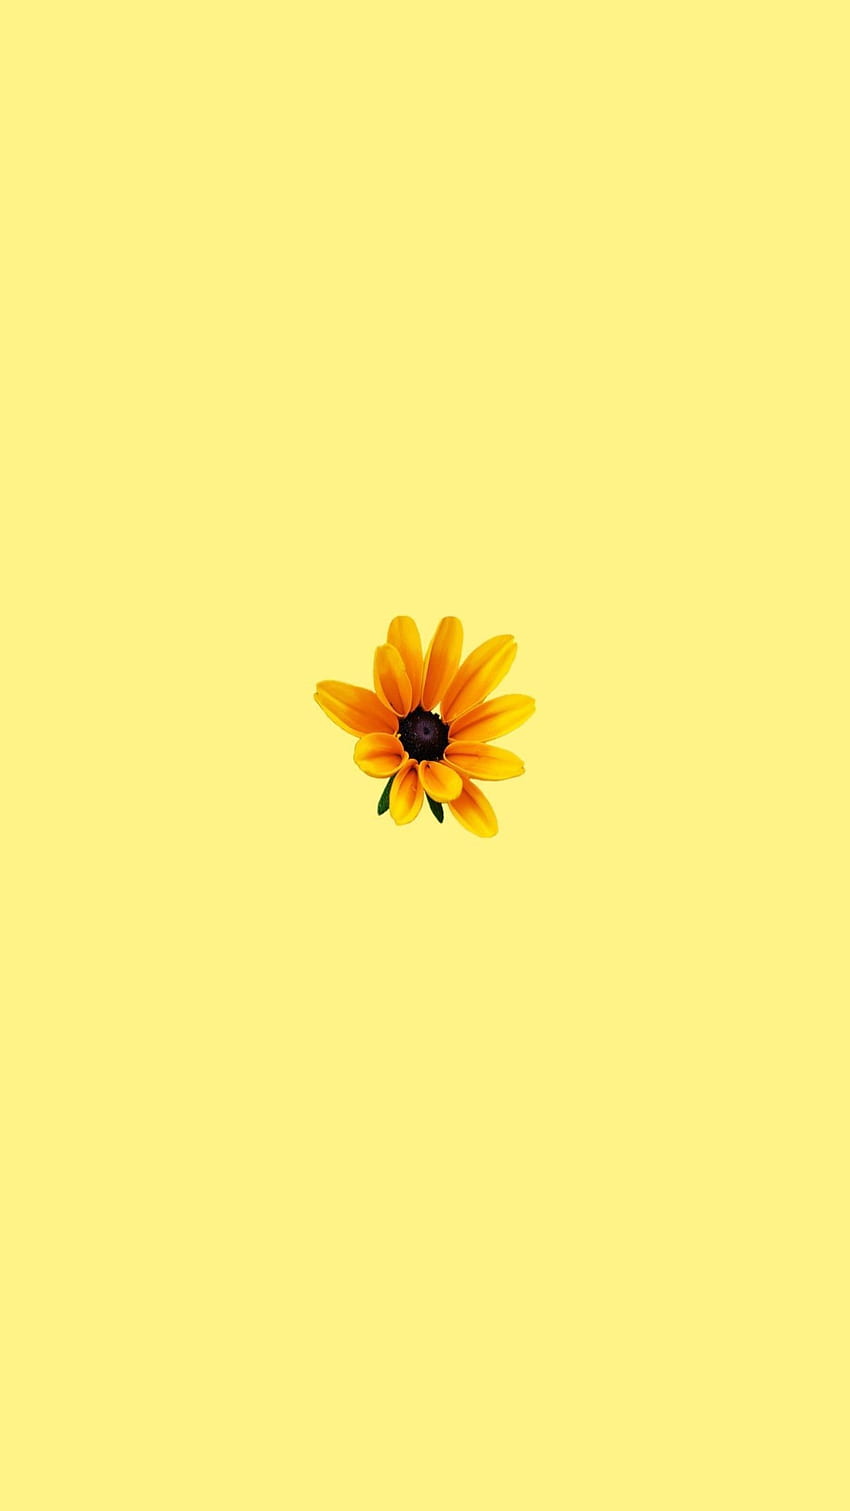 51 Yellow Aesthetic Wallpaper Options For iPhone  IdeasToKnow